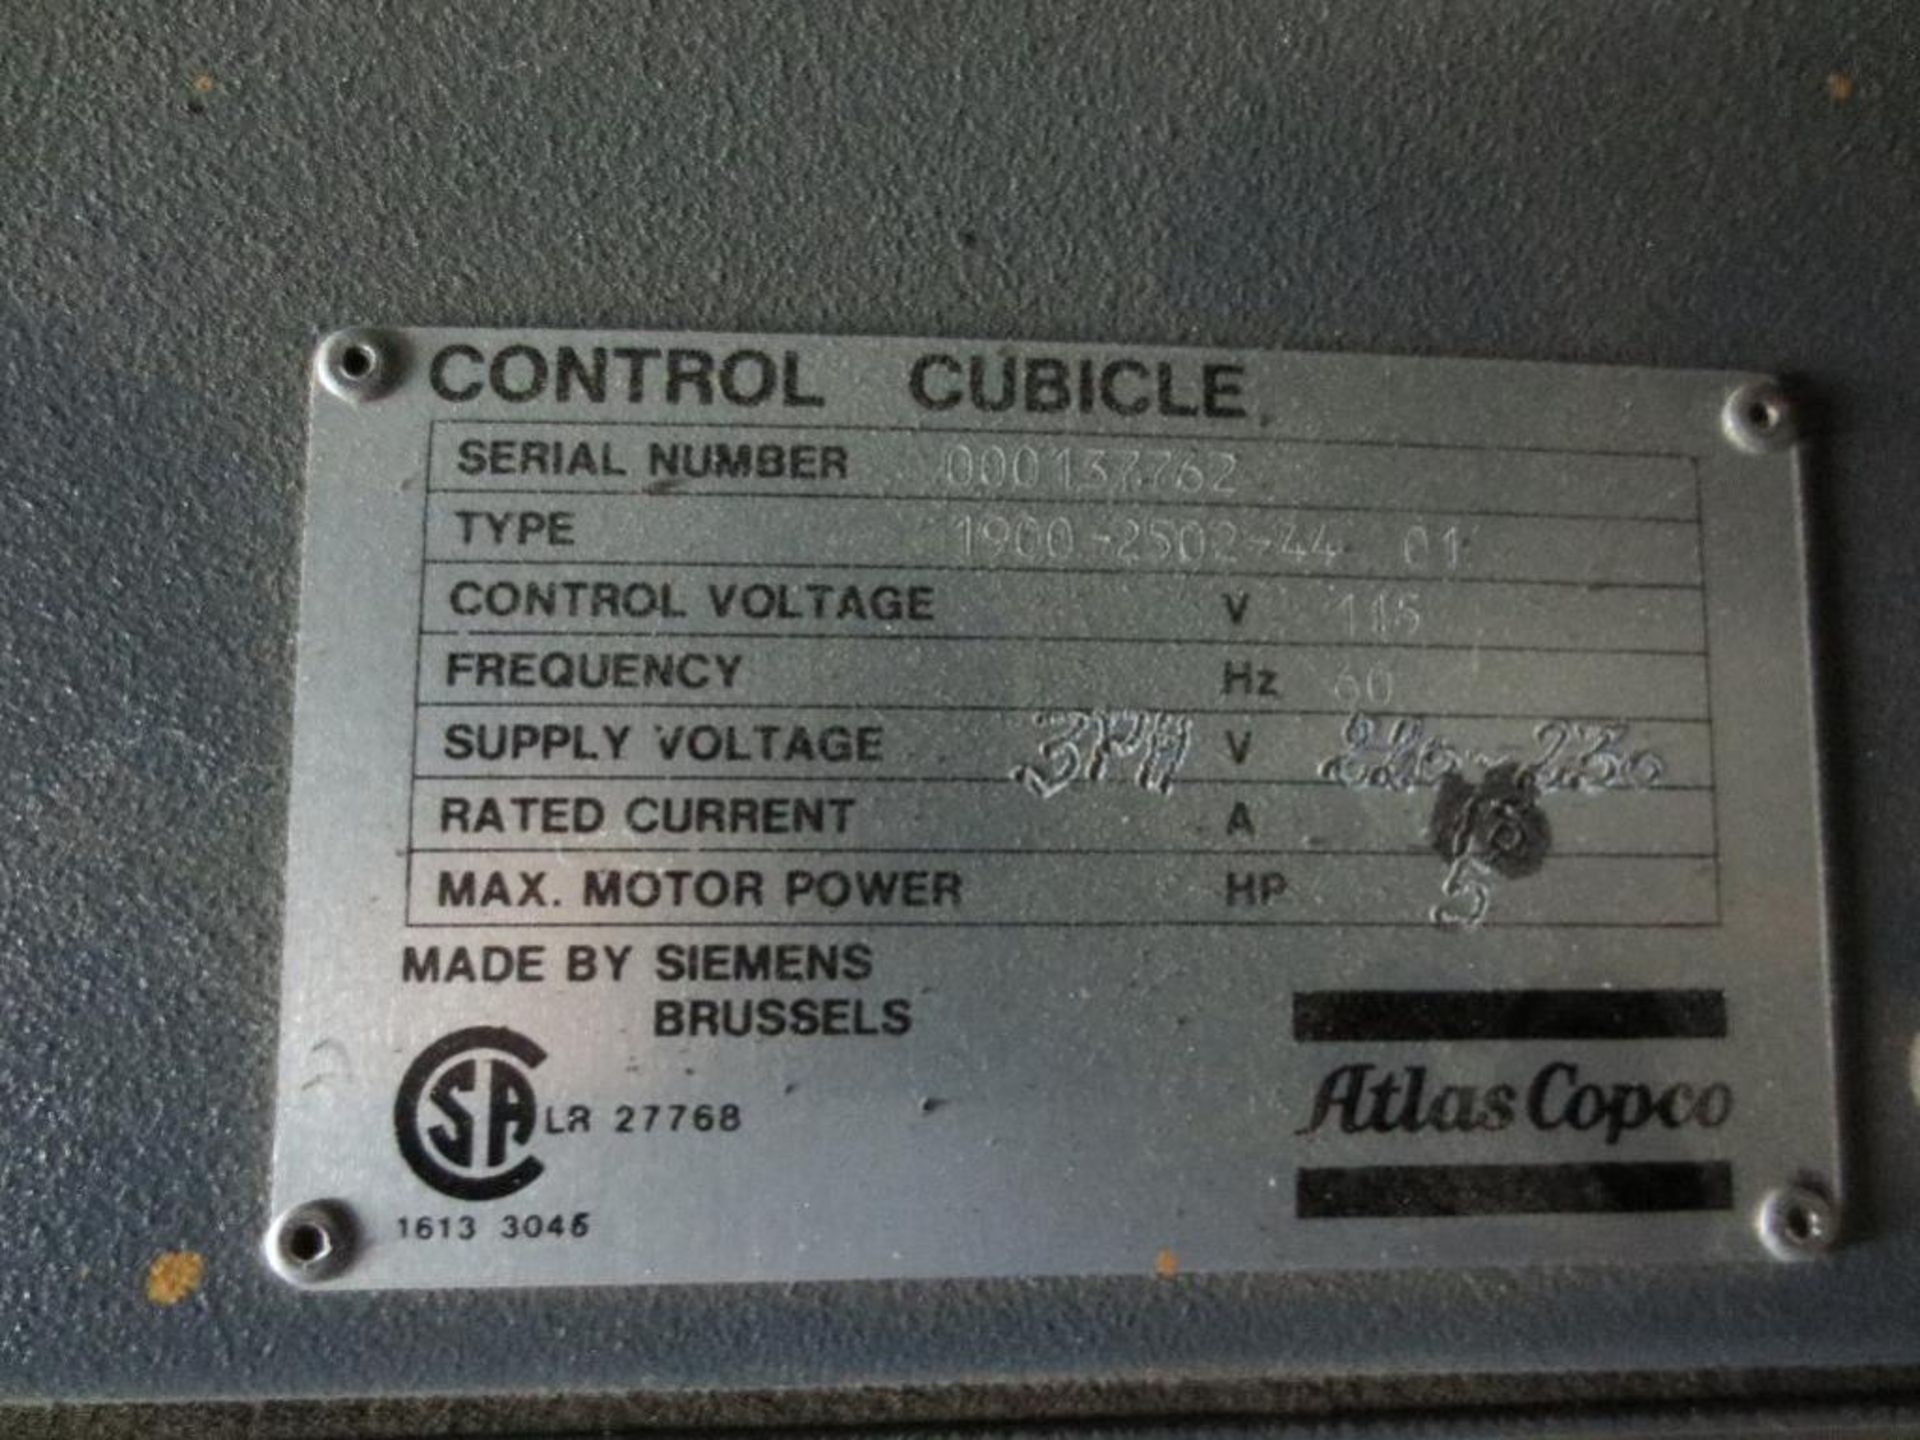 Atlas Copco air compressor and tank 5hp 14.2 cfm air delivery Mfg. date 1999 - Image 5 of 5